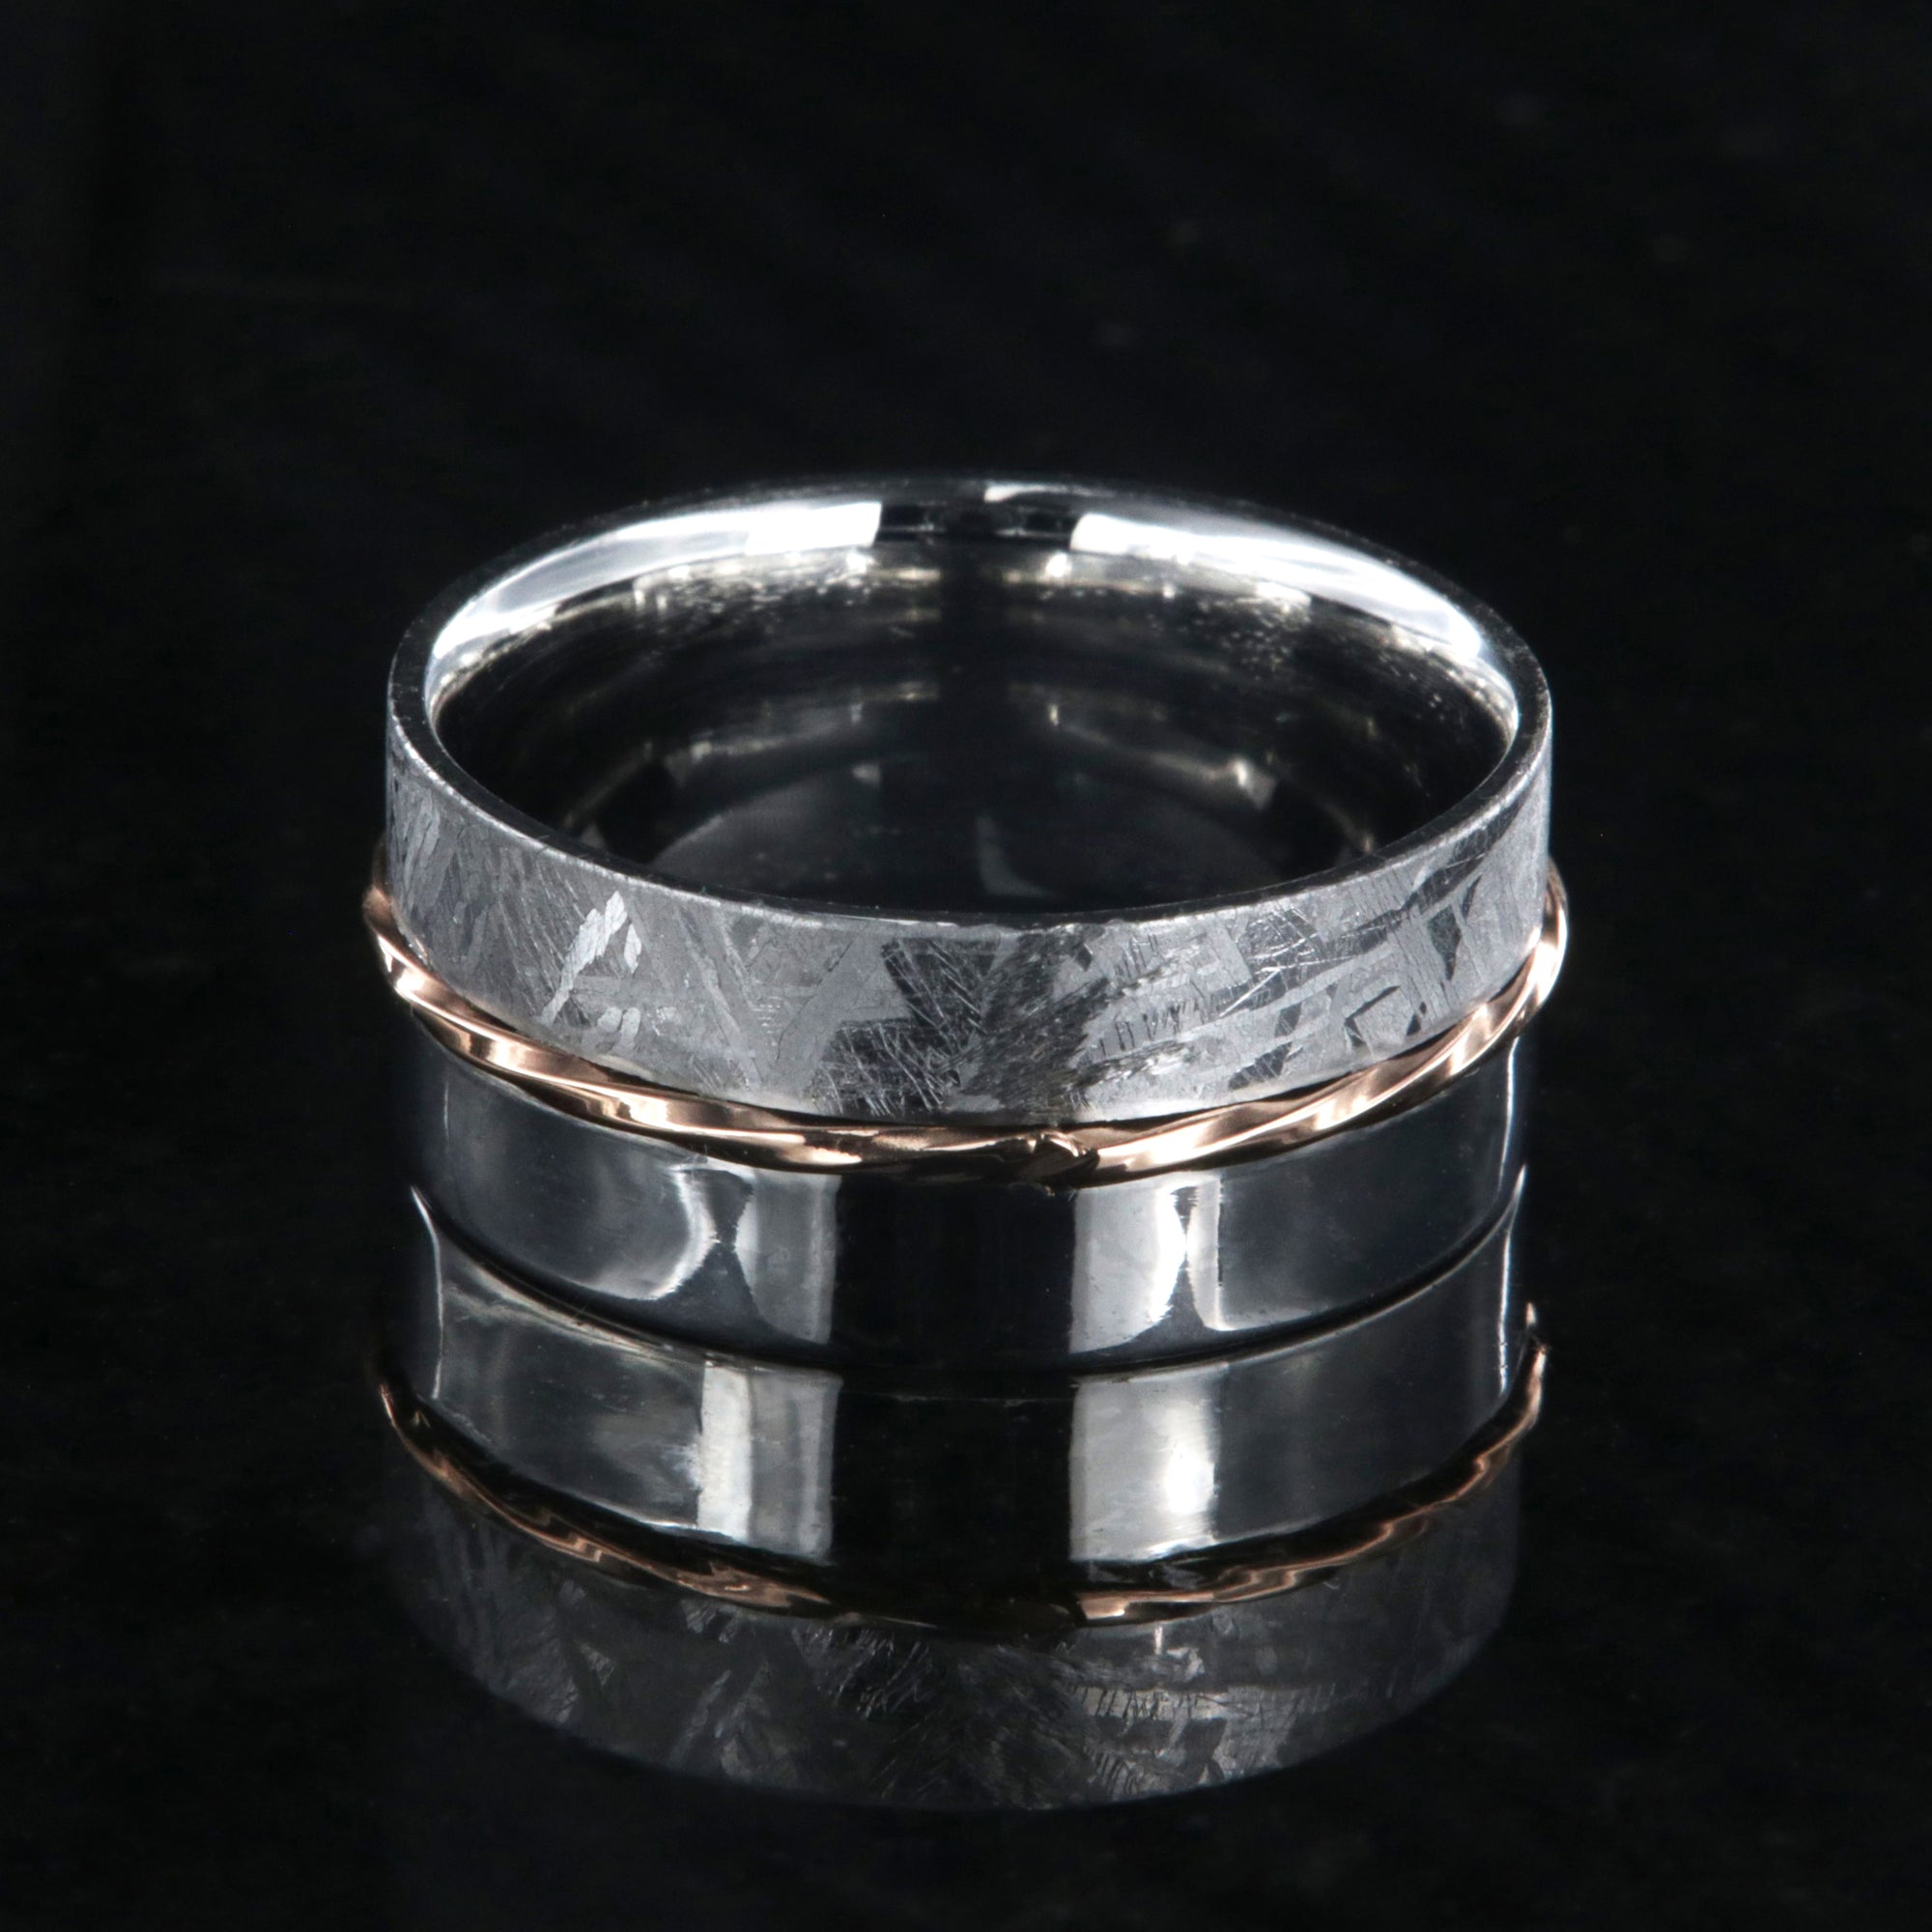 8mm wide men's wedding band with one half meteorite and the other of polish cobalt with a twisted rose gold inlay